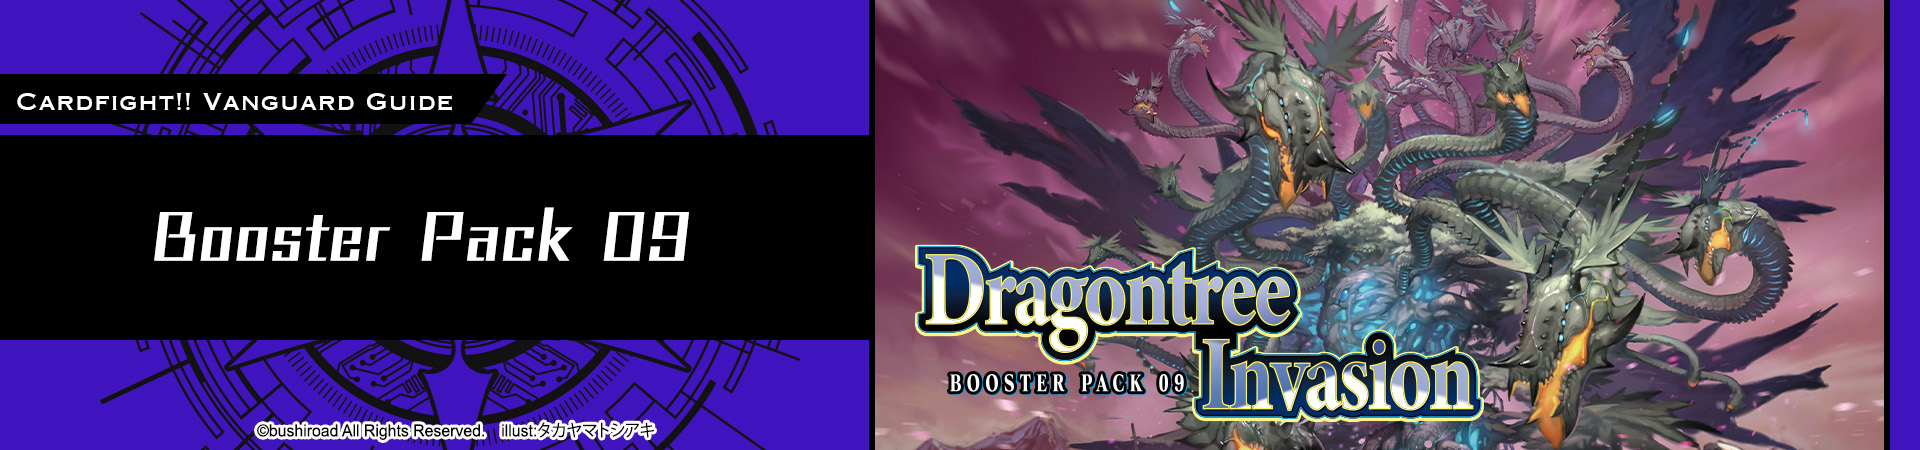 DBT09 Dragontree Rising Official Guide Top Banner